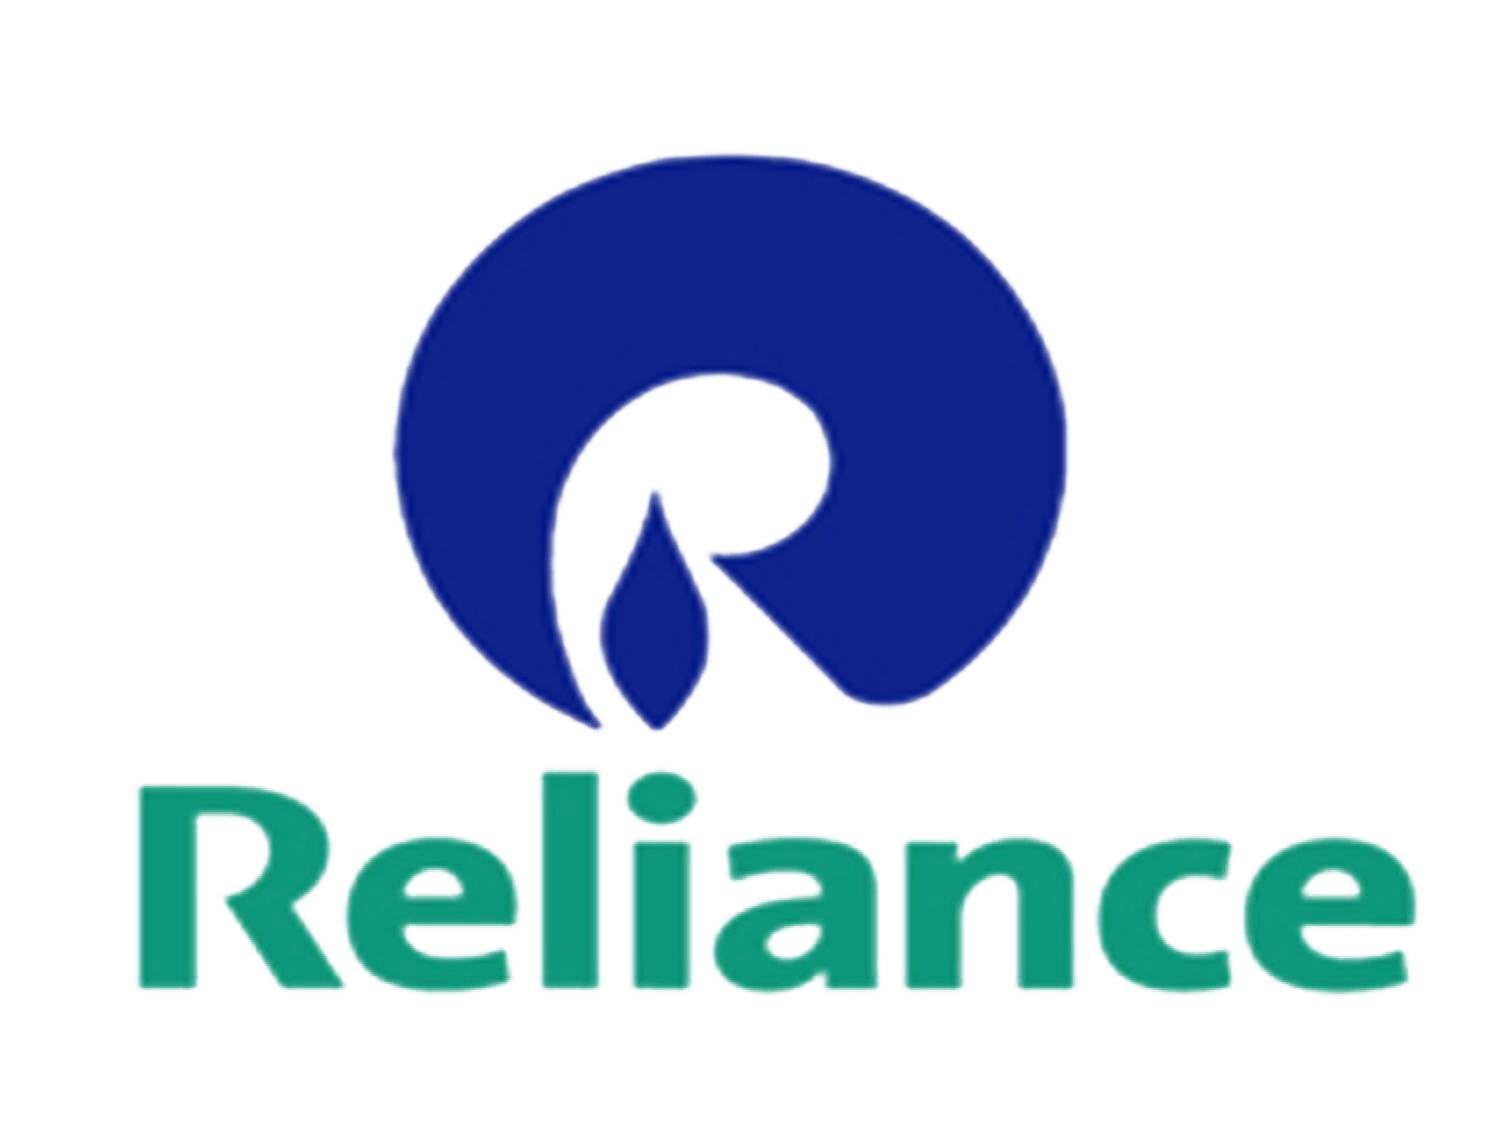 reliance logo wallpapers